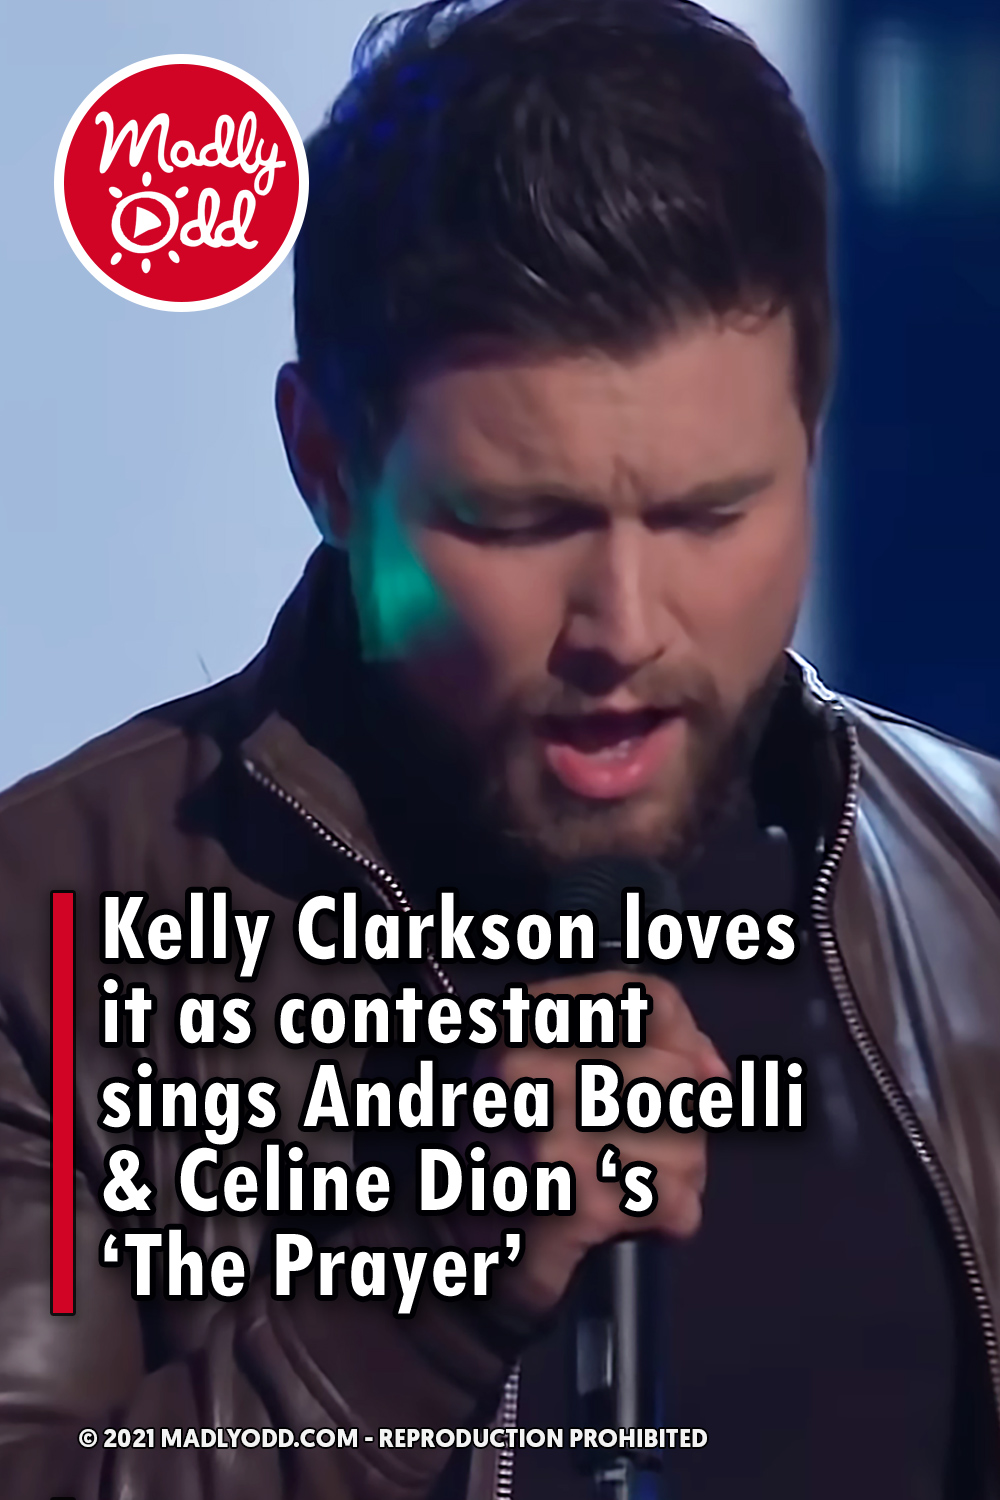 Kelly Clarkson loves it as contestant sings Andrea Bocelli & Celine Dion ‘s ‘The Prayer’